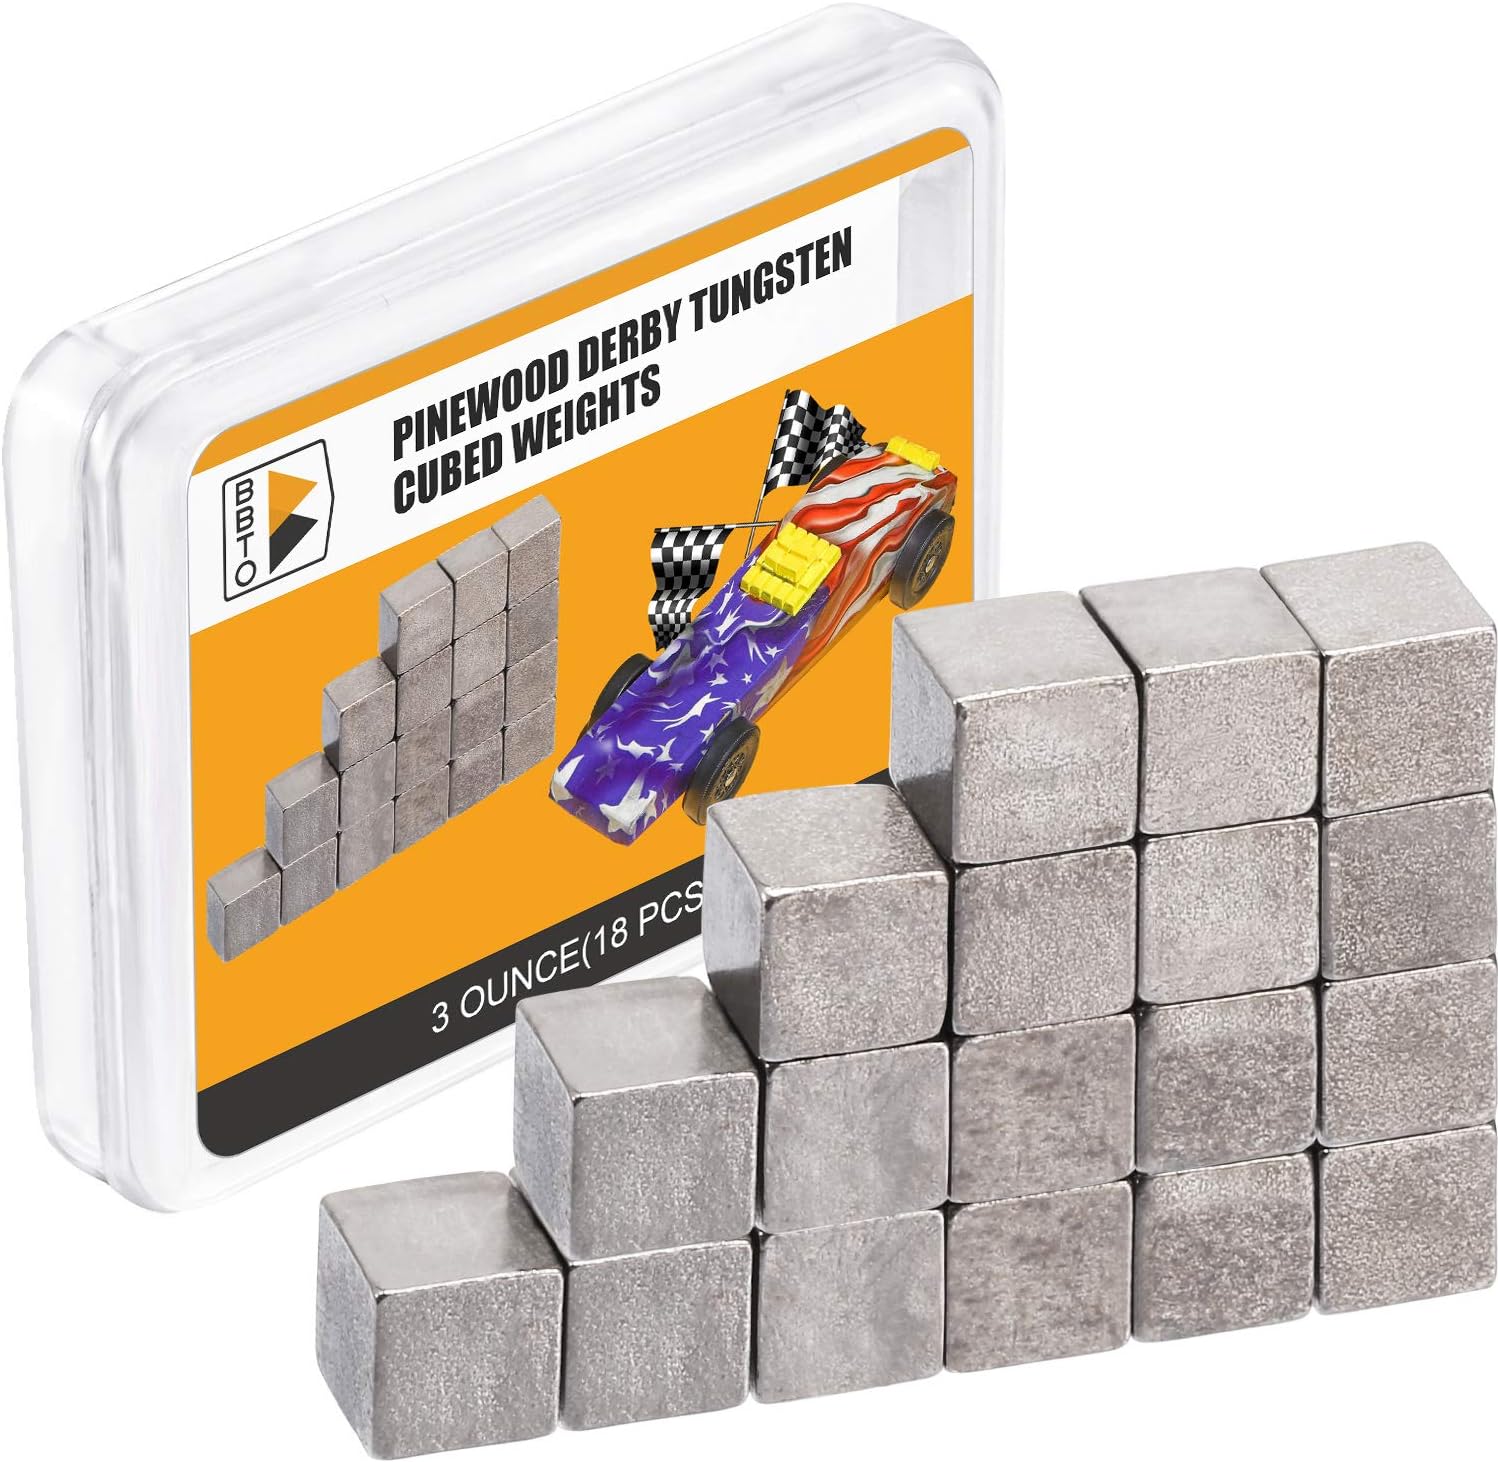 3 Ounce Tungsten Weights 1/4 Inch Car Cube Weights Incremental Derby Weight Compatible with Pinewood Car Derby Weights